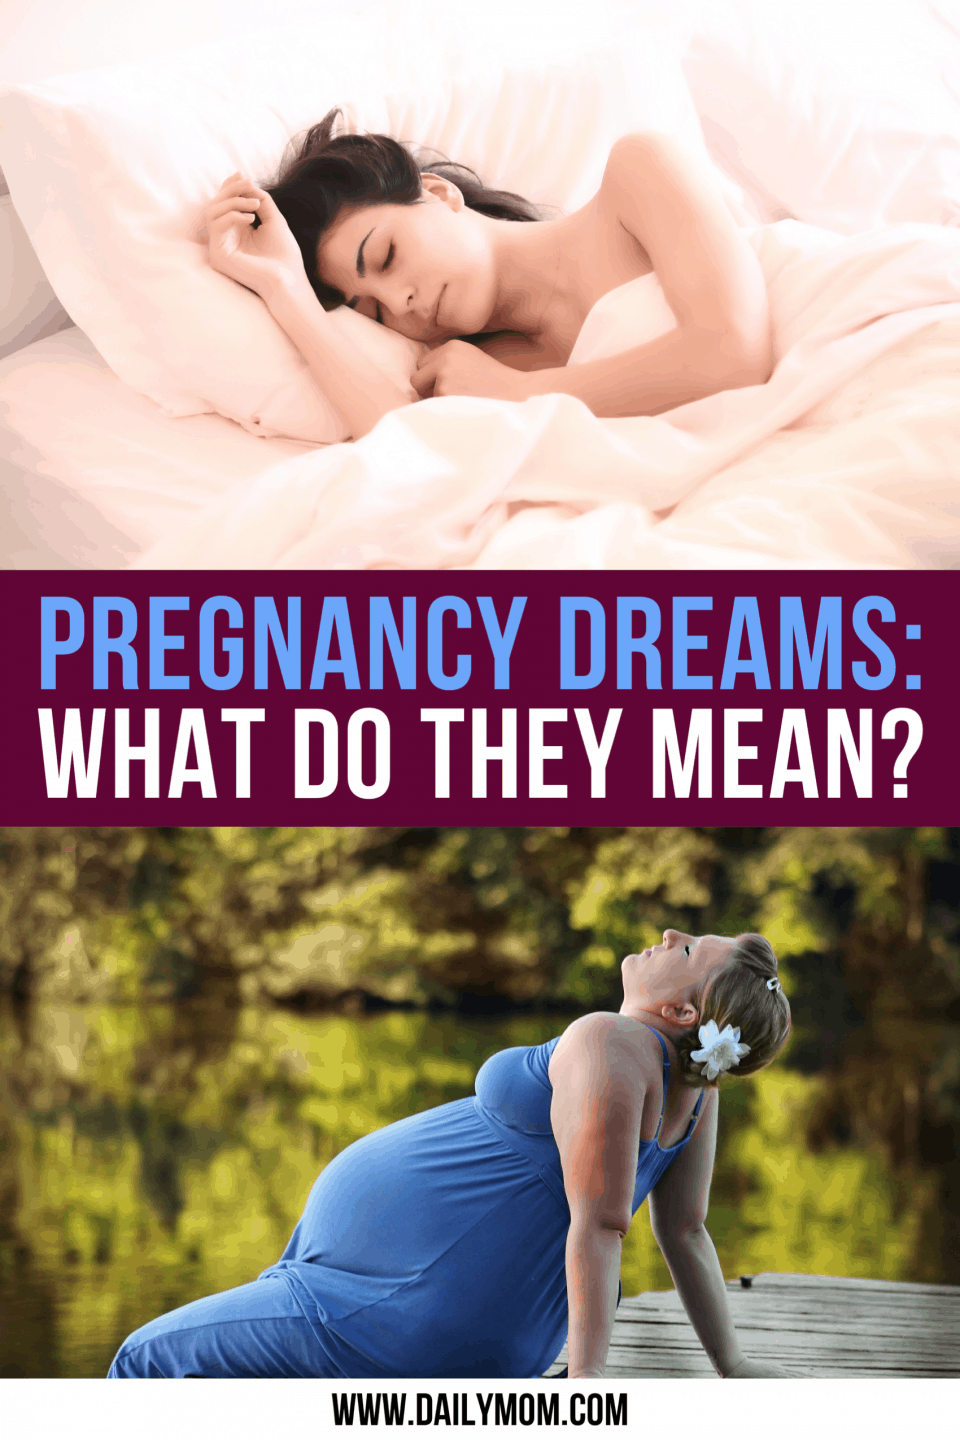 Daily Mom Parent Portal Pregnancy Dream Meaning